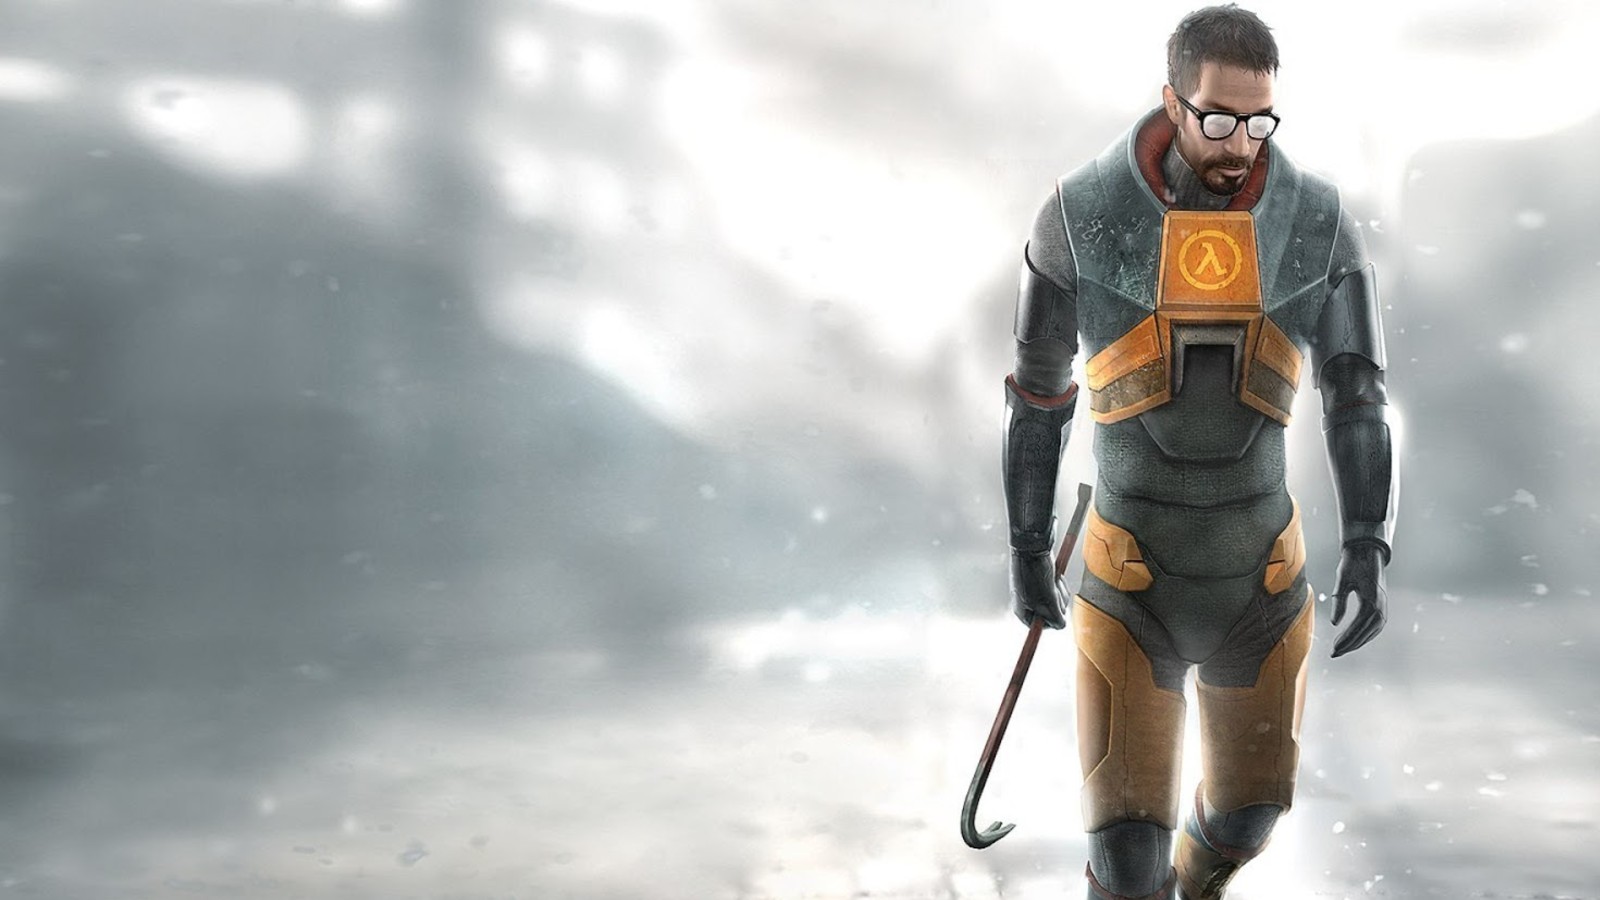 Half-Life: Alyx changes the game for VR exclusives, Opinion